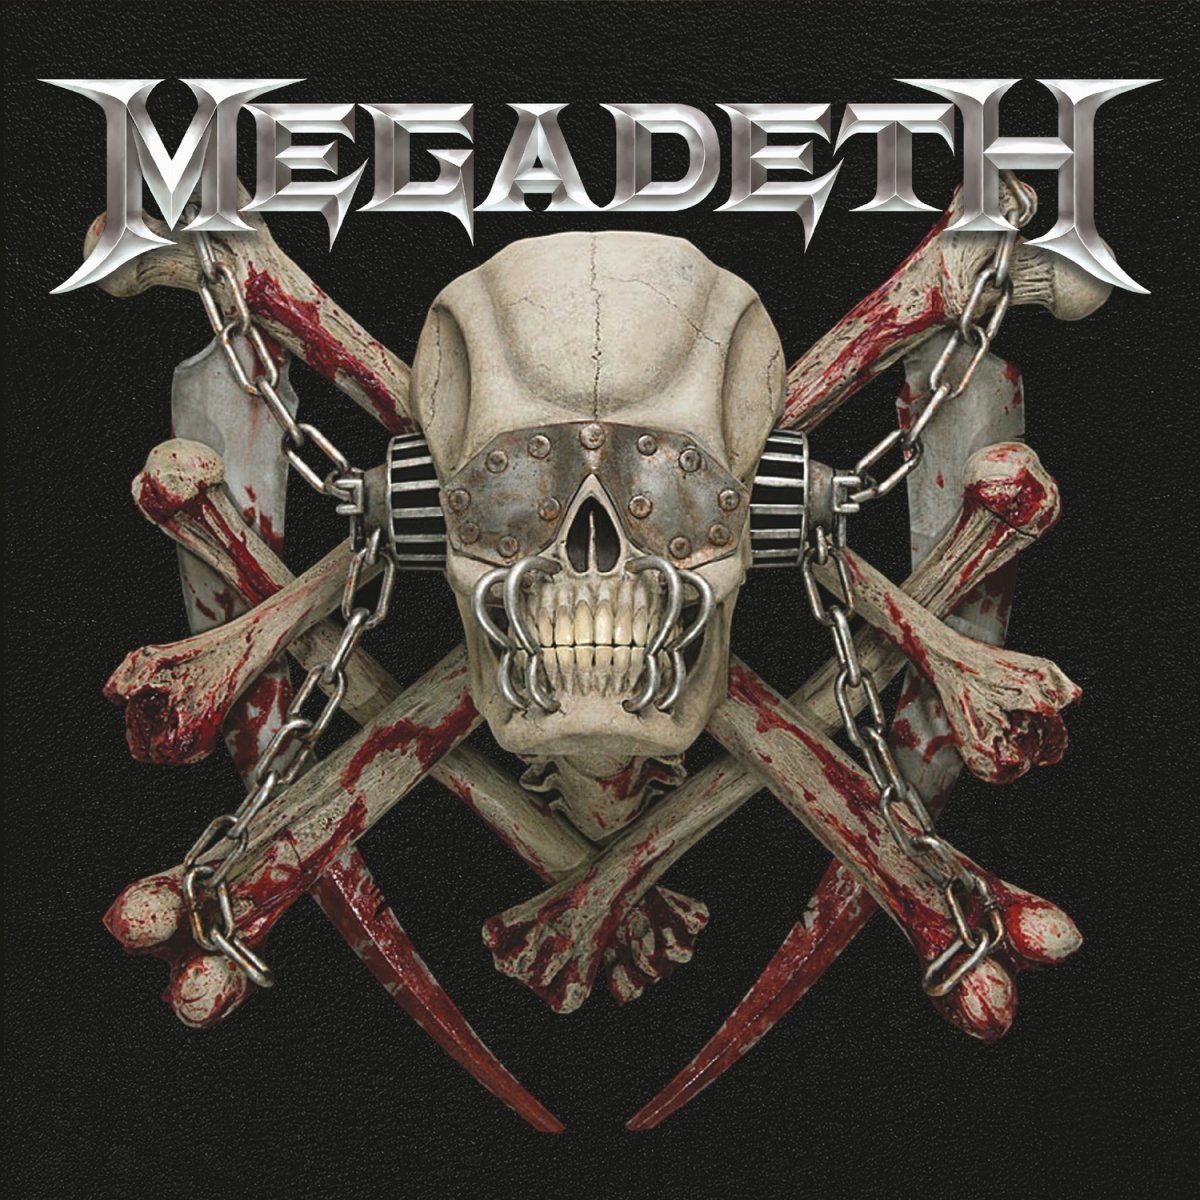 LP platňa Megadeth Killing is My Business... and Business is Good - The Final Kill (2 LP)